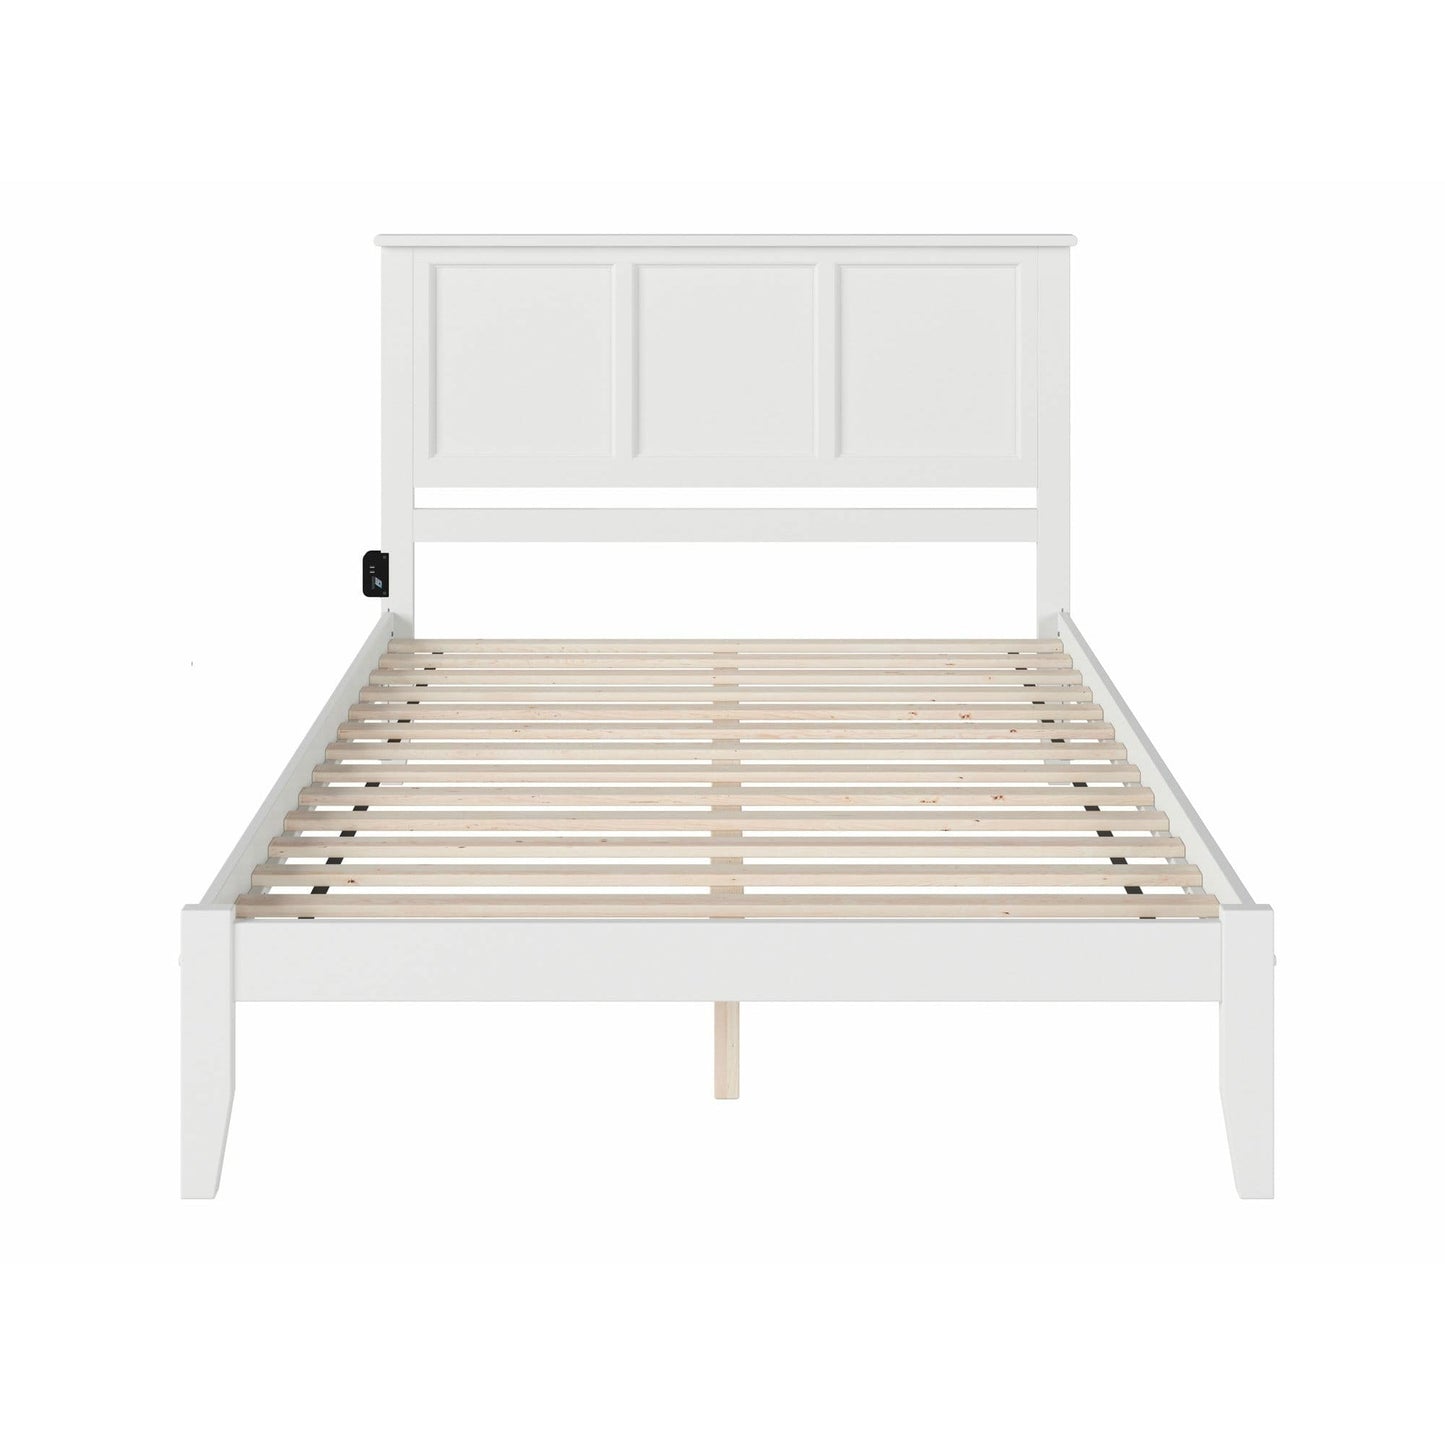 Atlantic Furniture Bed Madison King Platform Bed with Open Foot Board in Espresso